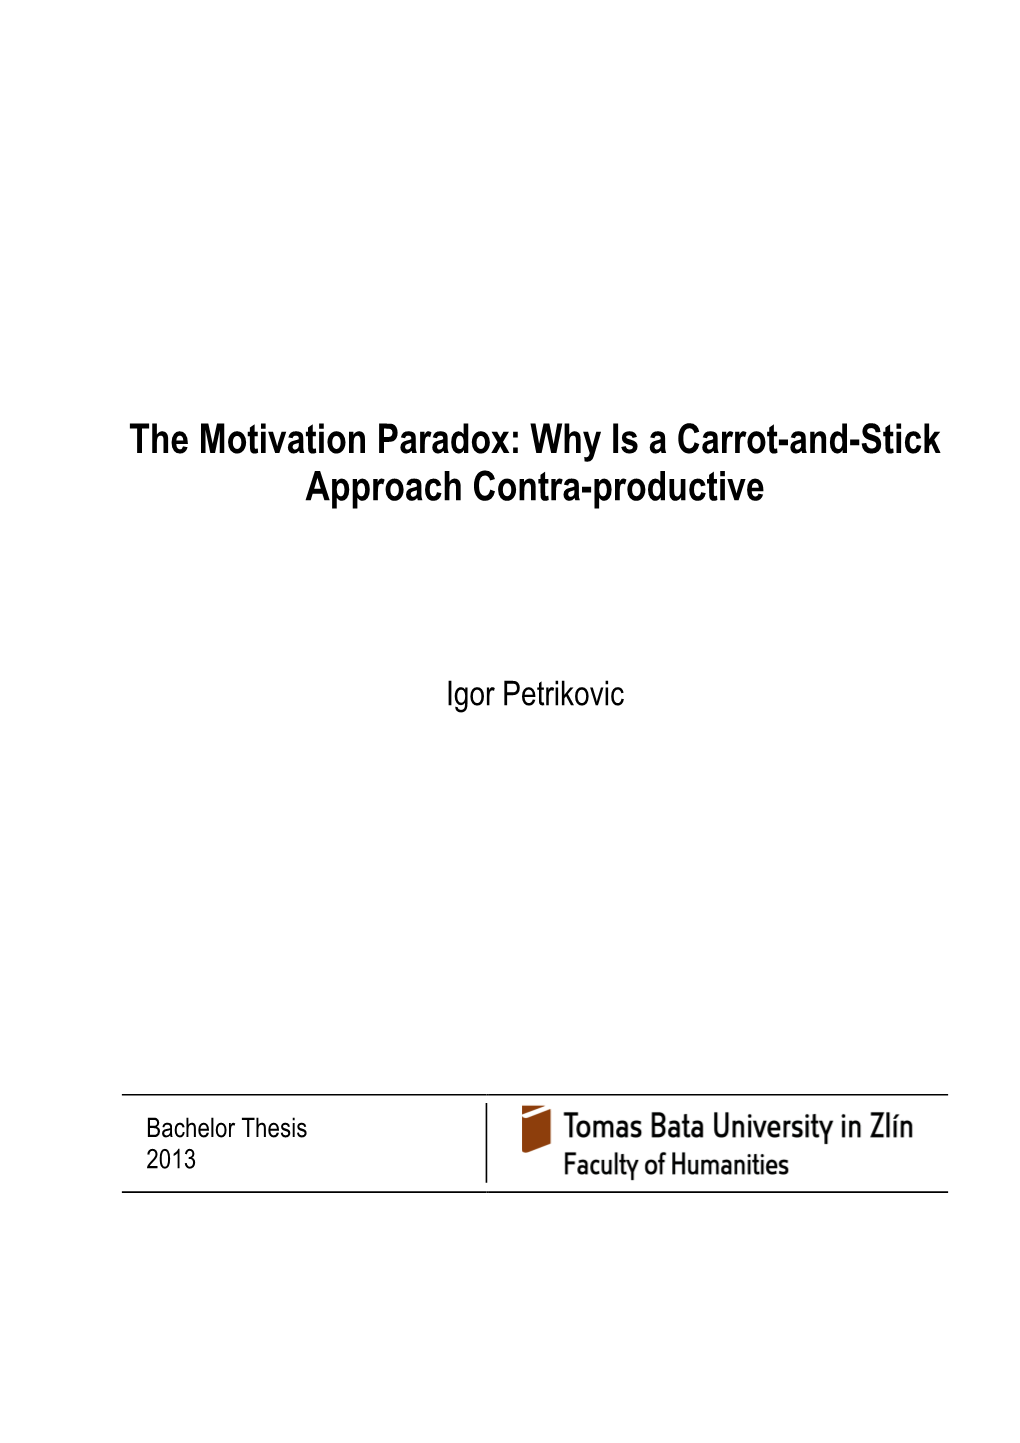 The Motivation Paradox: Why Is a Carrot-And-Stick Approach Contra-Productive